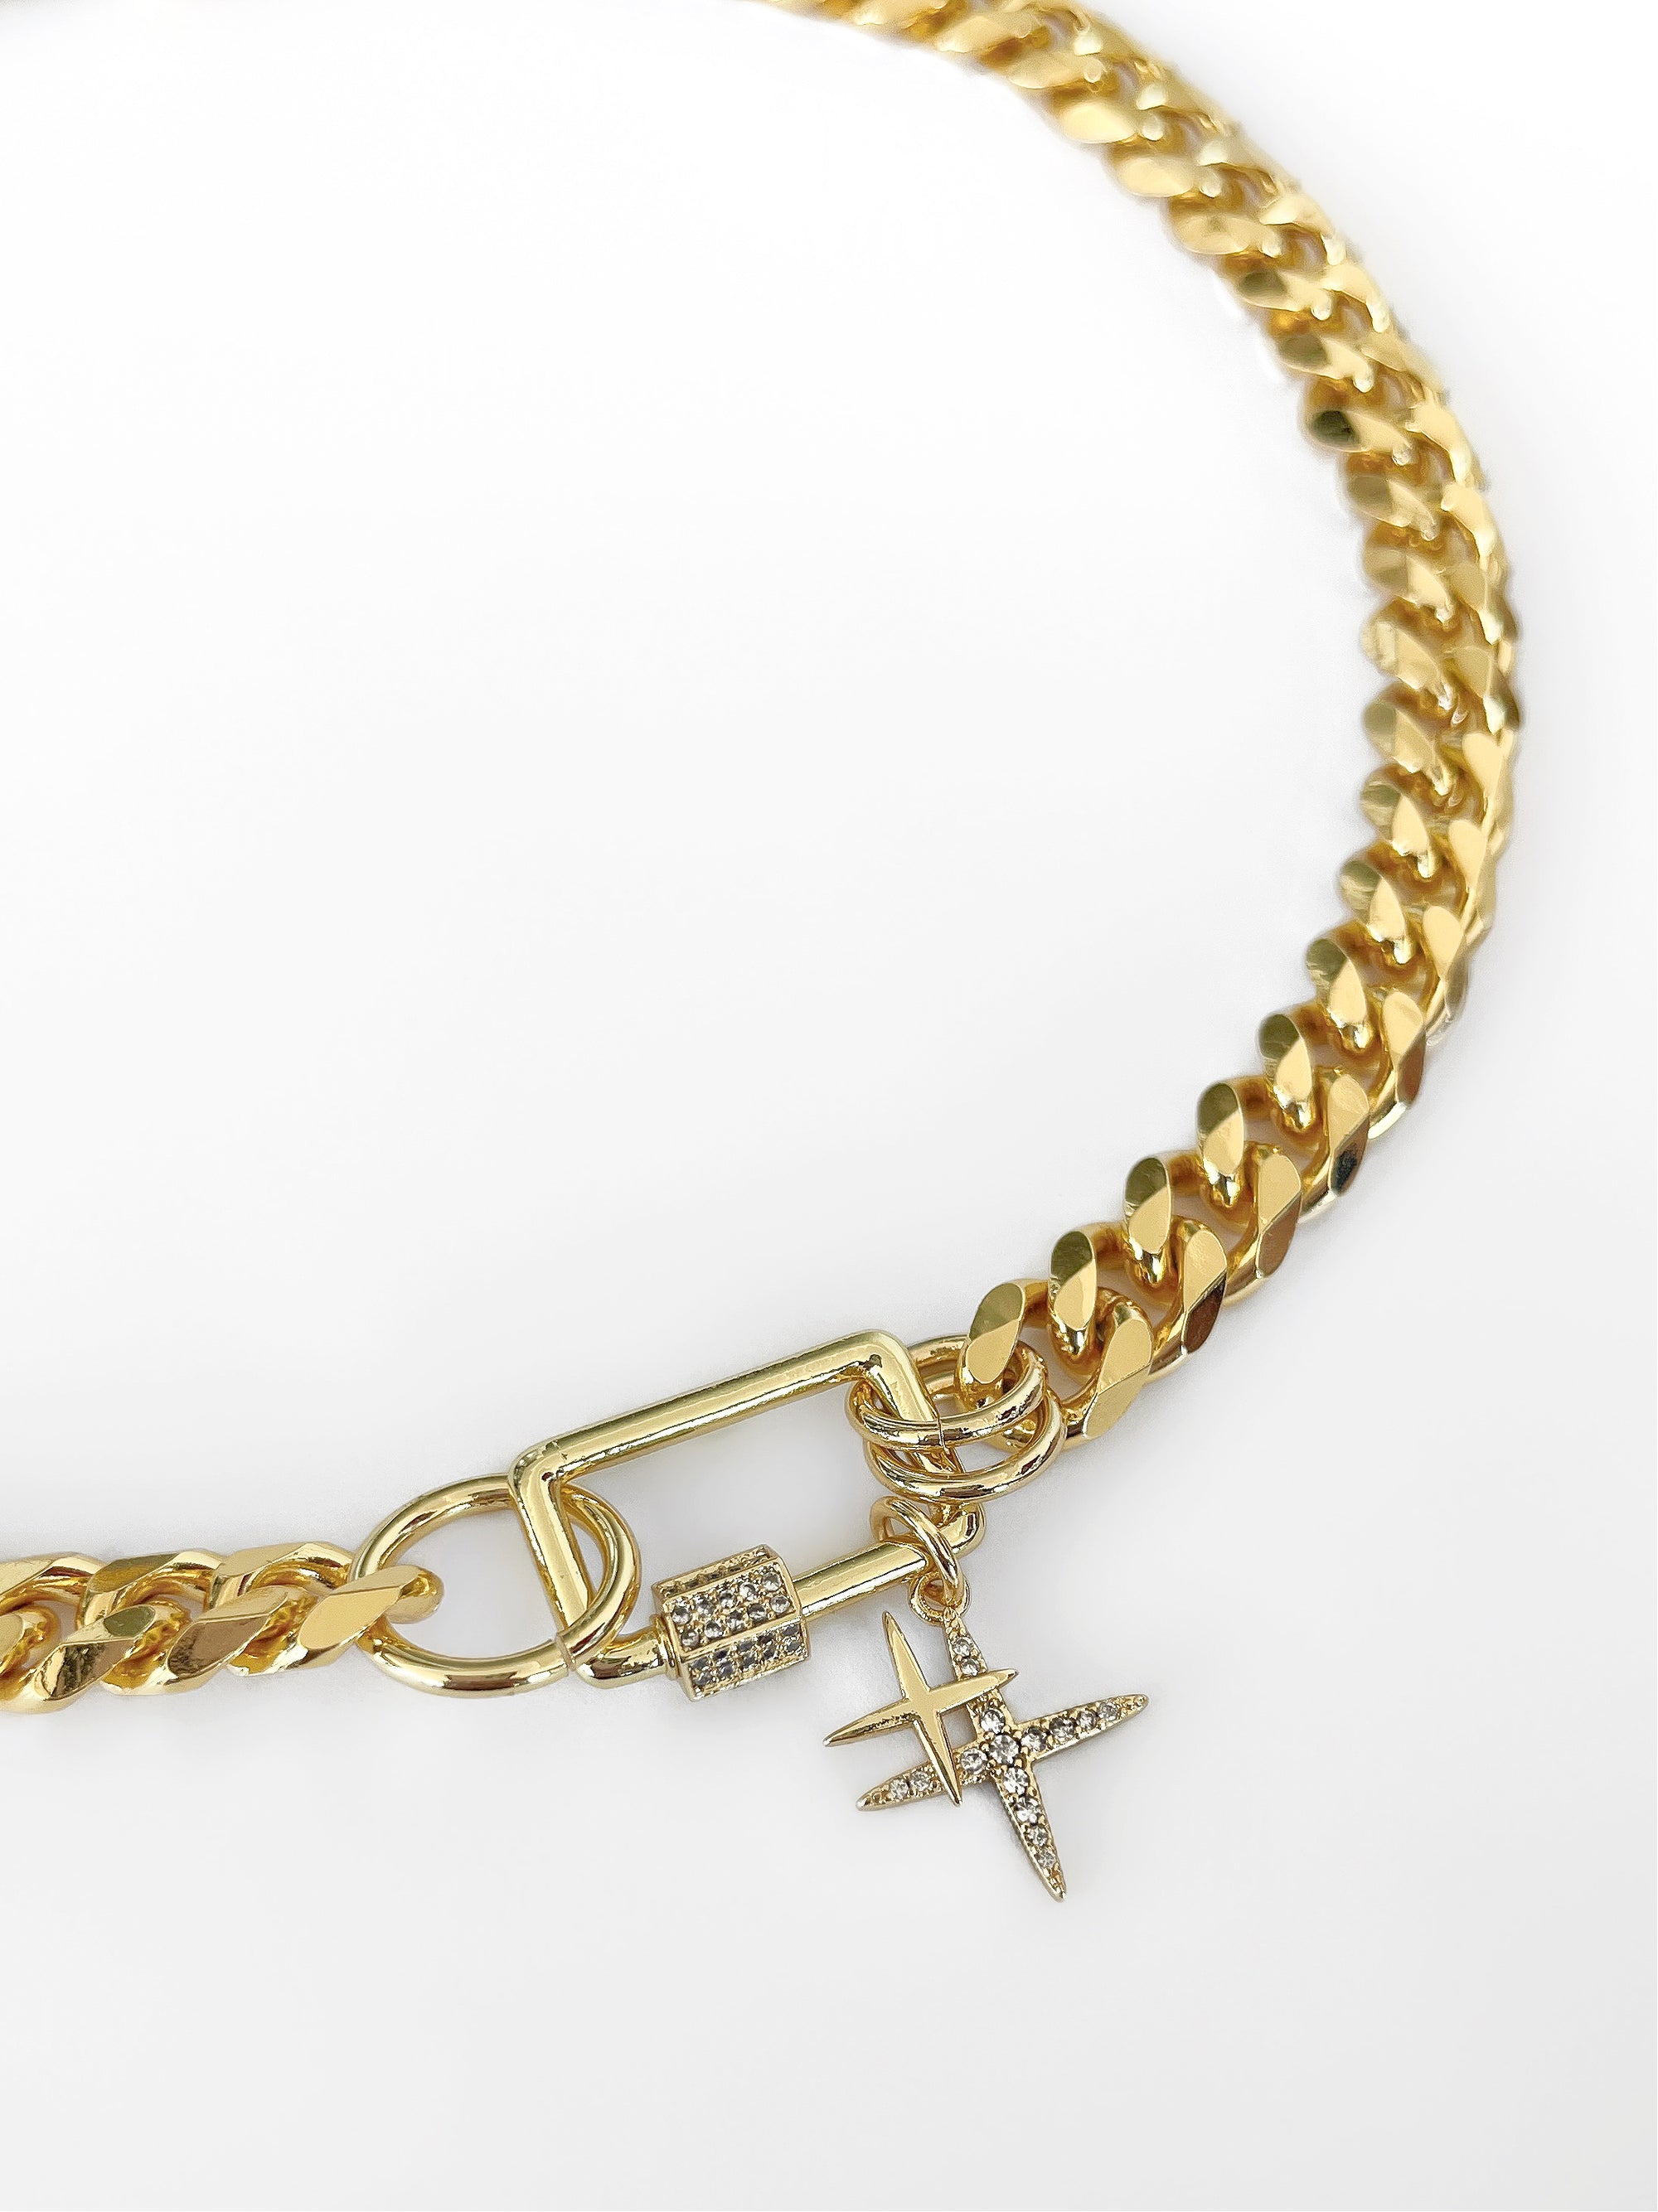 RADIANT GOLD CARABINER CHAIN NECKLACE